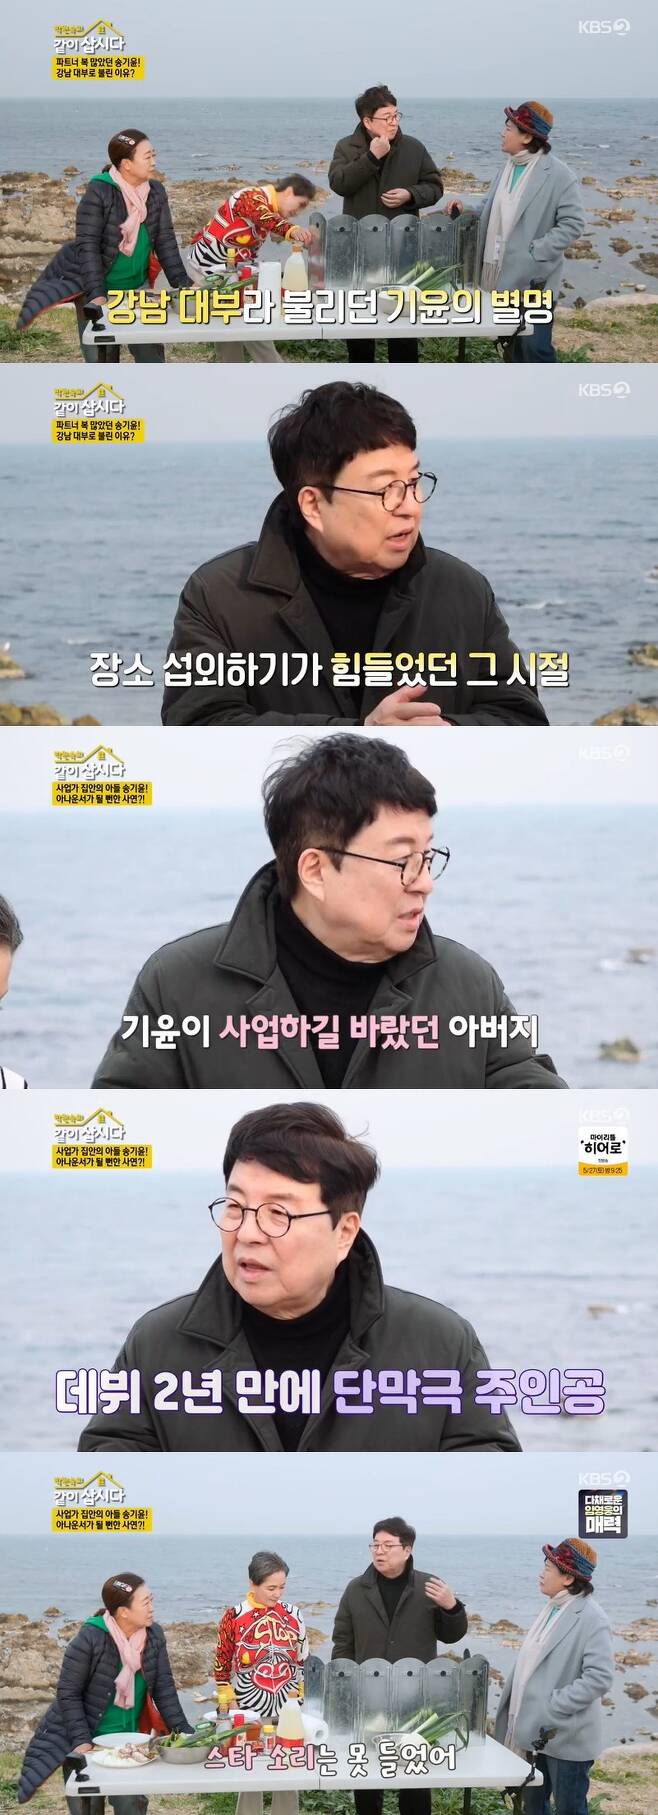 Actor Ki-yoon Song revealed the moment he became an actor.On May 16, KBS 2TV Lets Live With Park Won-sook Season 3, Actor Ki-yoon Song met with four sisters (Park Won-sook, Hye Eun Yi, Ahn So-young, and an mun-suk).On this day, Ki-yoon Song said that his nickname is Gangnam District The Godfather.Ki-yoon Song said, In the past, it was hard to cast a place when shooting. If Casting did not work, I got in touch with me unconditionally.So I got the nickname Gangnam District The Godfather. Ki-yoon Song said, I saw the test at Seoul National University and dropped it. As soon as I got the test paper, I had a problem that was too easy to write, but I did not write my name.Ki-yoon Song recalled, My father ran a military payroll business after the brewery business and he wanted me to take over, but I didnt listen.When I was in college, I had a drama club. I was the first person to win the Grand Prize at the national competition, he said. At that time, I was a local MBC announcer apprentice.In the end, I passed the MBC 7th Bond Talent and have been acting so far. Ki-yoon Songs life as an actor was a success. I played the main character in a one-act play two years after my debut. I was scouted by KBS and starred in TV Grandchildrens Art of War. I almost watched each stations drama, he said.Ki-yoon Song, which received a lot of love with its warm image. I did not hear the sound of the star, he said, but instead, I did not hear the sound of this baby.